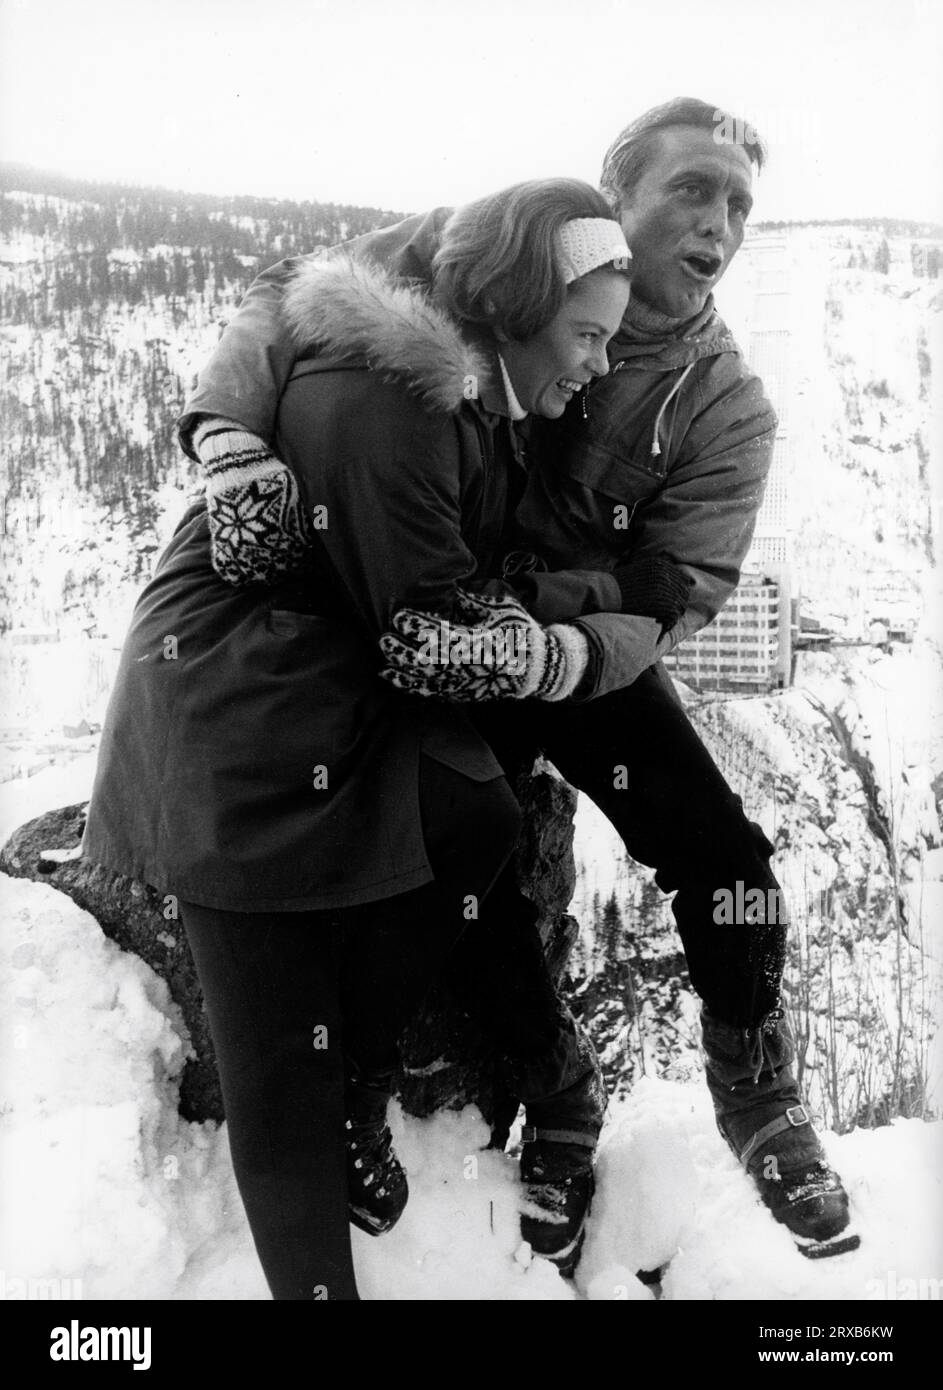 KIRK DOUGLAS and ULLA JACOBSSON on set location candid in Norway during filming of THE HEROES OF TELEMARK 1965 director ANTHONY MANN novel Knut Haukelid and John Drummond screenplay Ivan Moffat and Ben Barzman and (uncredited) Harold Pinter music Malcolm Arnold Benton Film Productions / Rank Film Distributors (UK) - Columbia Pictures (US) Stock Photo